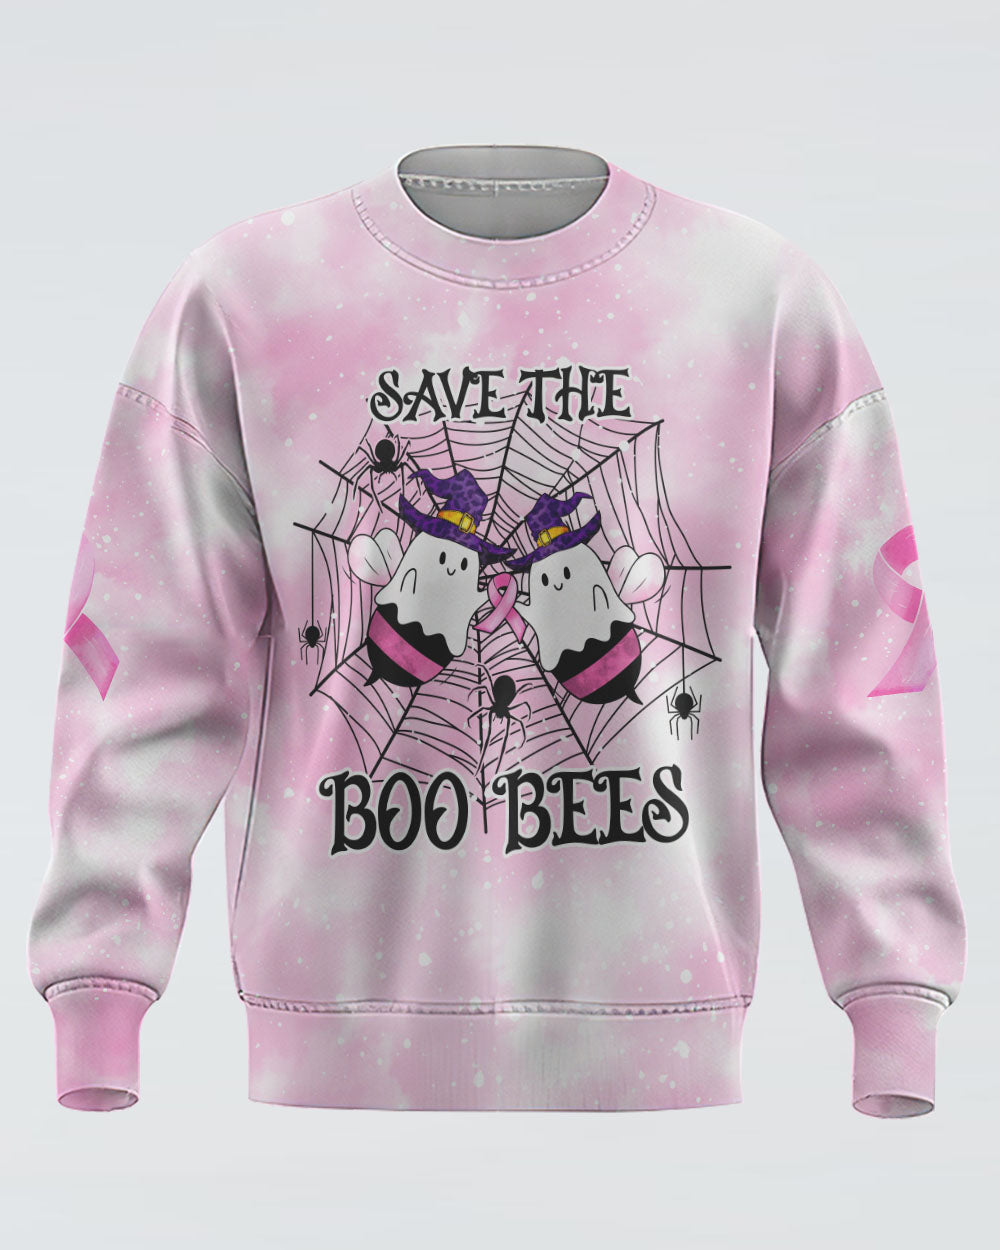 Save The Boo Bees Women's Breast Cancer Awareness Sweatshirt